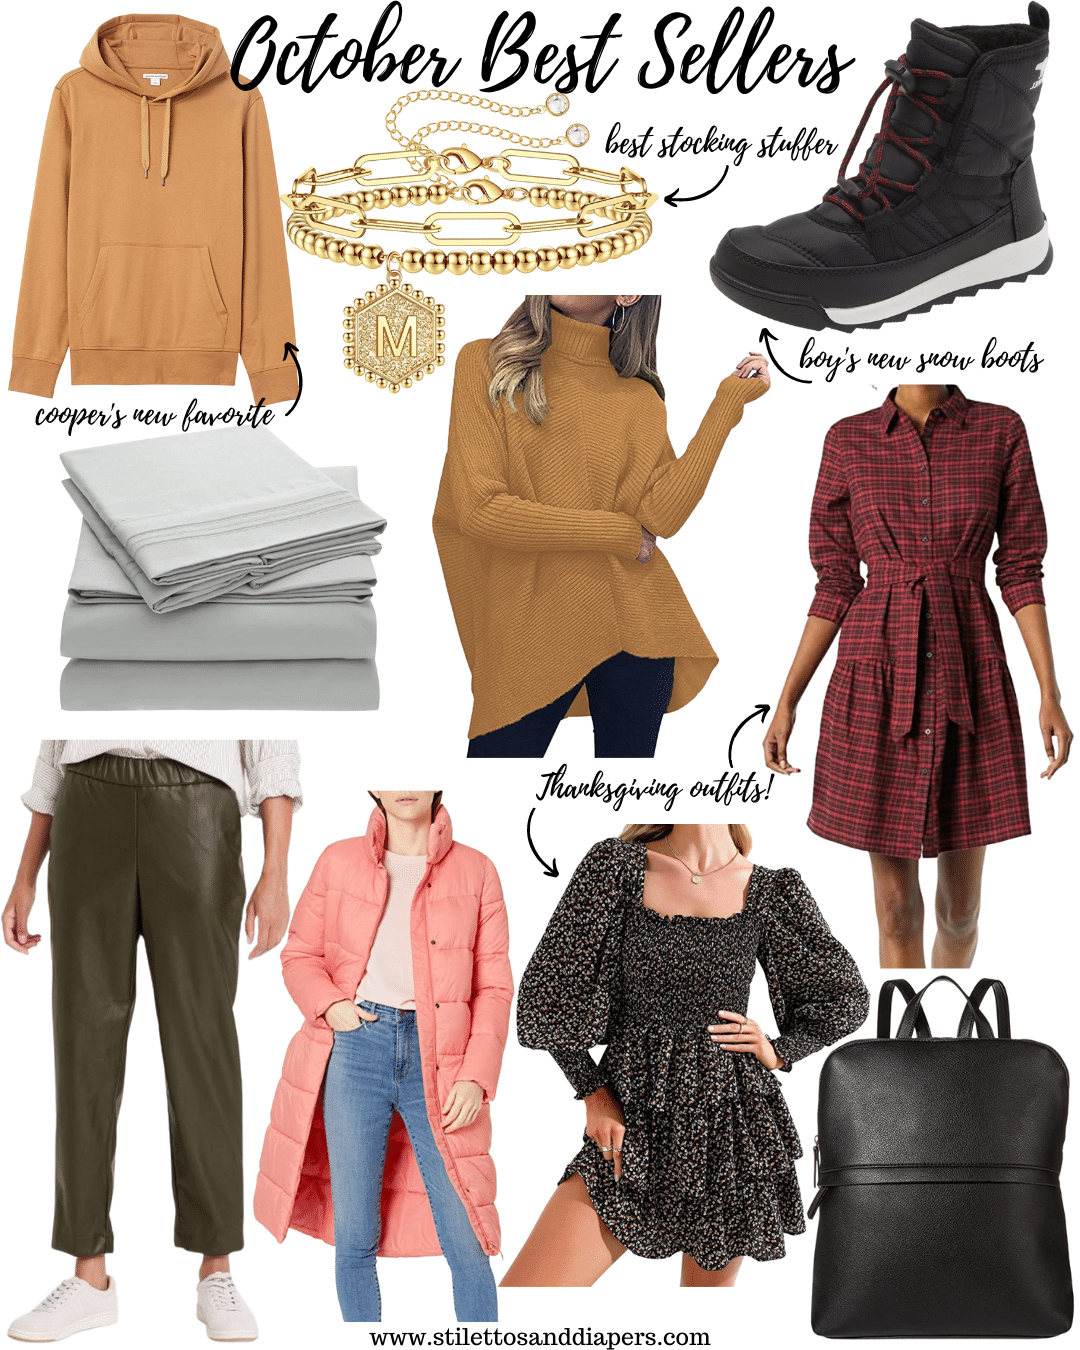 October Best Sellers, Amazon finds, Fall favorites, Thanksgiving Outfit ideas, Stilettos and Diapers